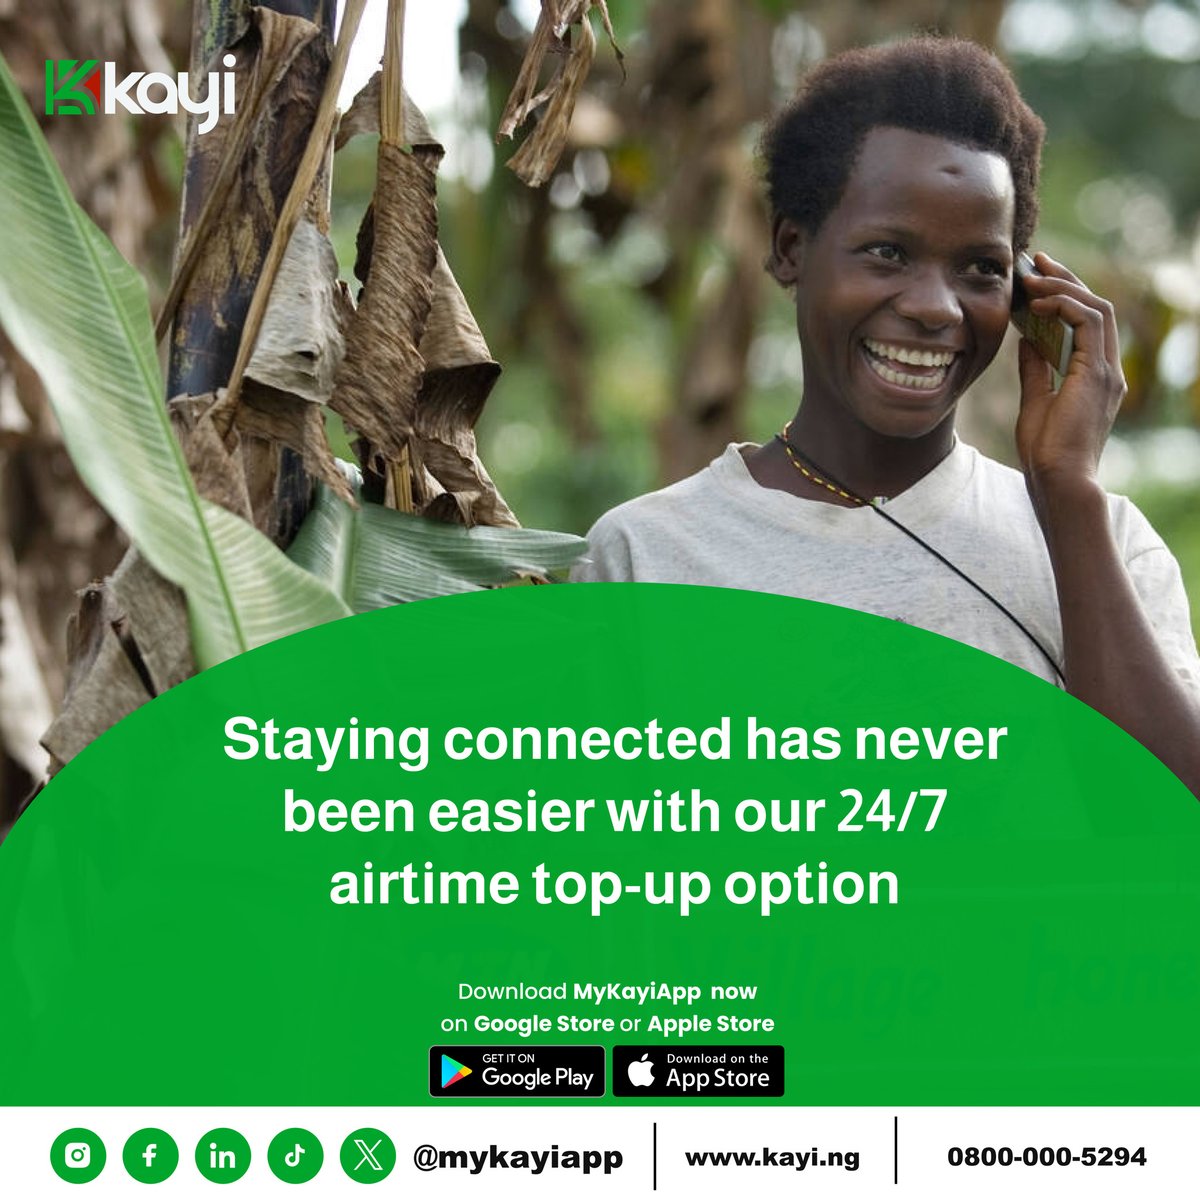 Living in rural areas? No worries! With Kayiapp, topping up airtime is now effortless even from the comfort of your own home. Enjoy seamless connectivity without the hassle of traveling to town. Stay connected, stay empowered
#MyKayiapp #RuralConnectivity
#Kayiway
#DigitalBanking